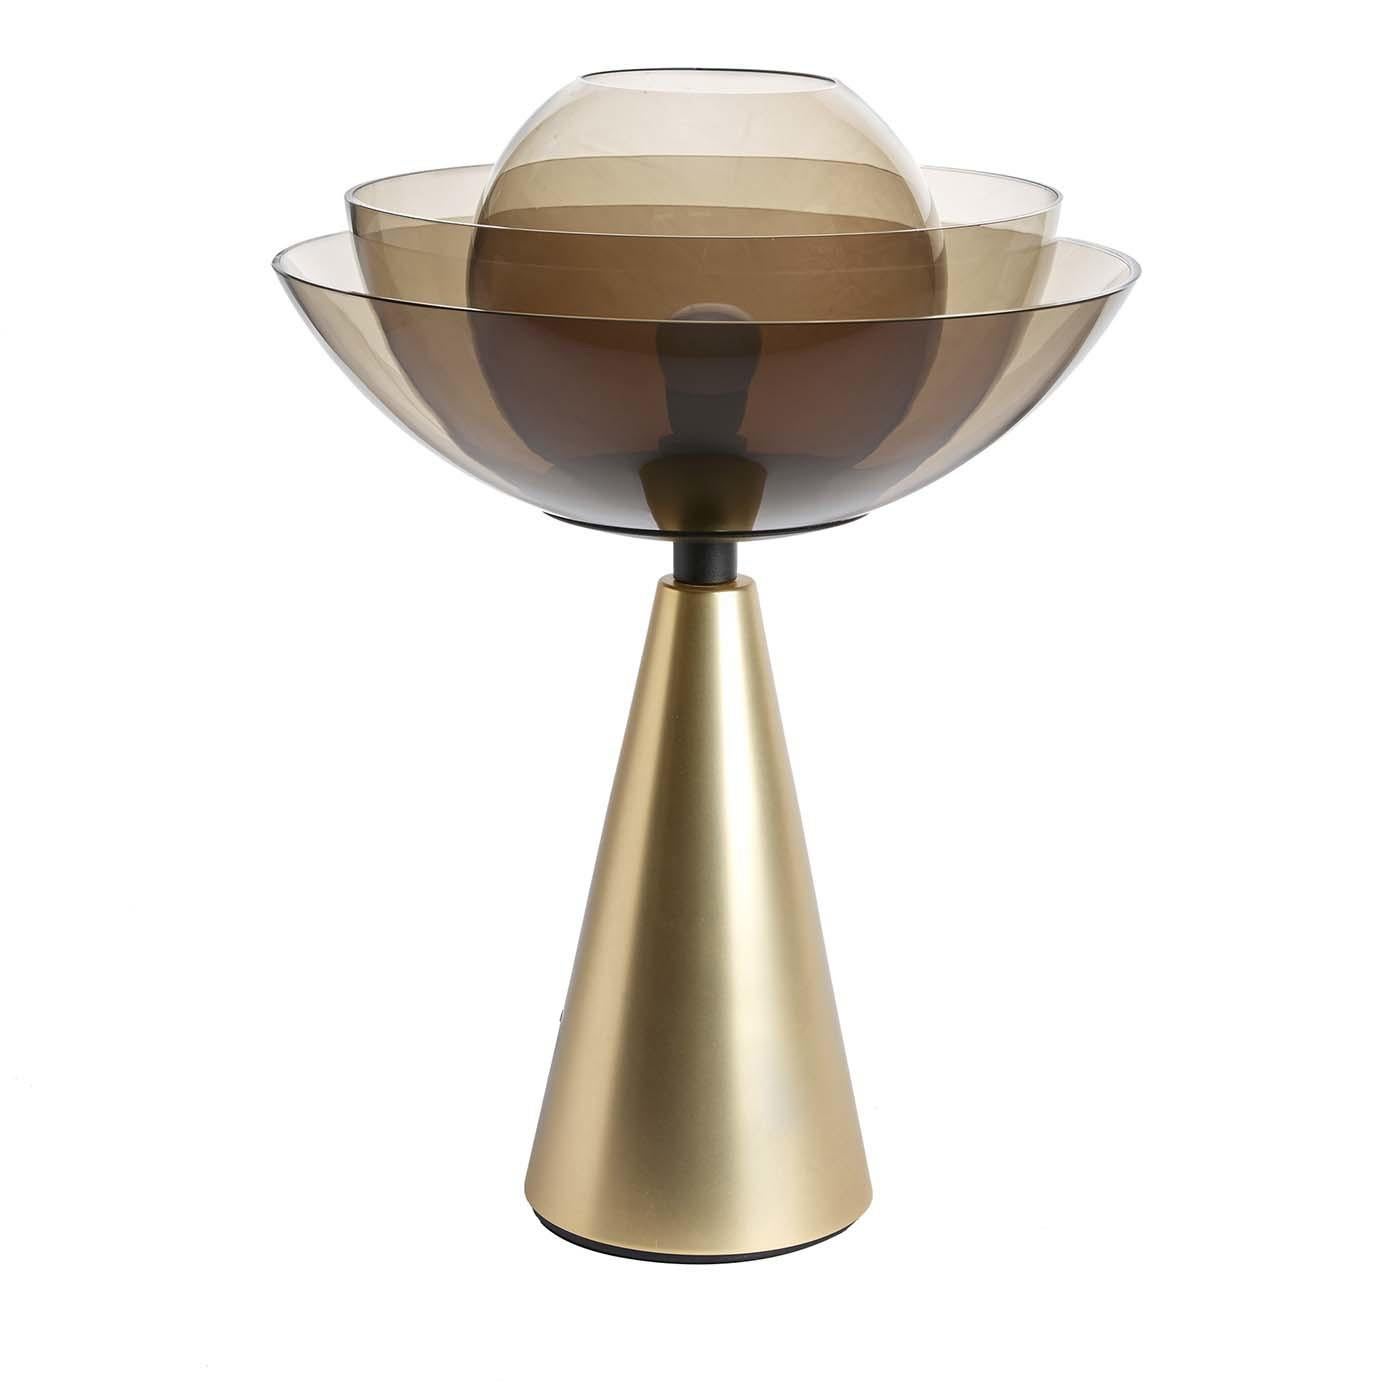 A fascinating design inspired by the lotus flower, this stunning table lamp embodies elegance, perfection, purity, and grace. Designed by Serena Confalonieri, this lamp is composed of a cone-shaped base in brass-coated iron with a stunning shade